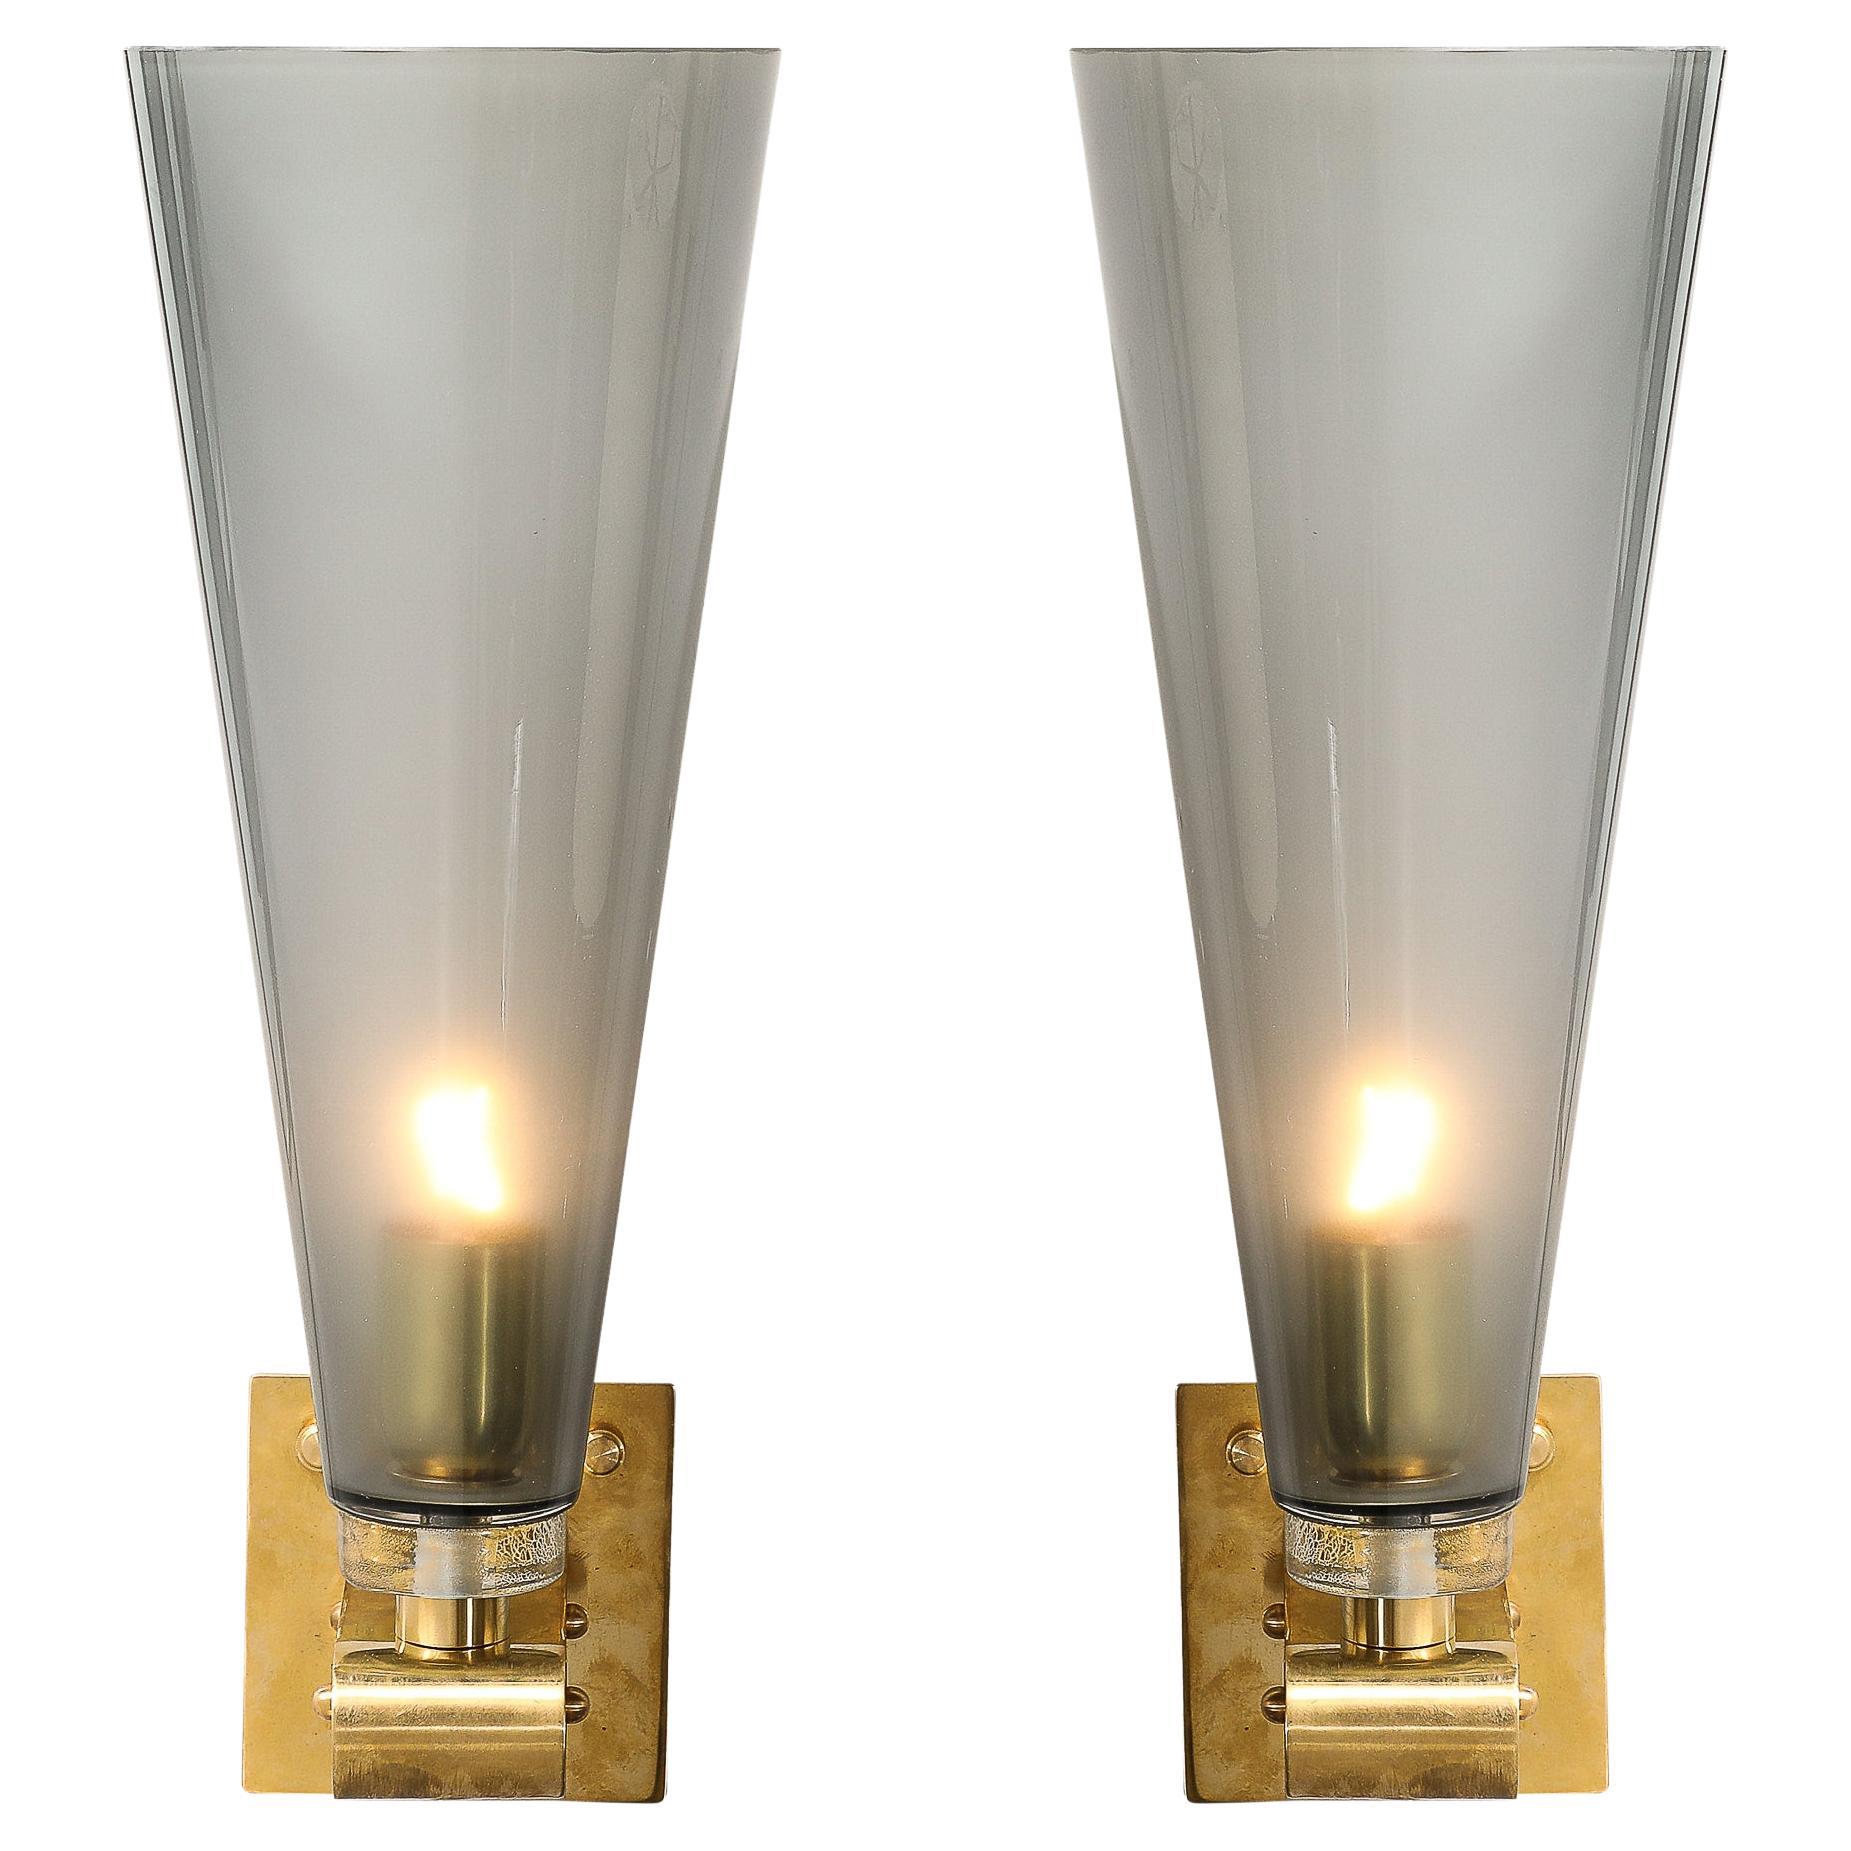 Modernist Conical Smoked Graphite Hand-Blown Murano Glass & Brass Sconces